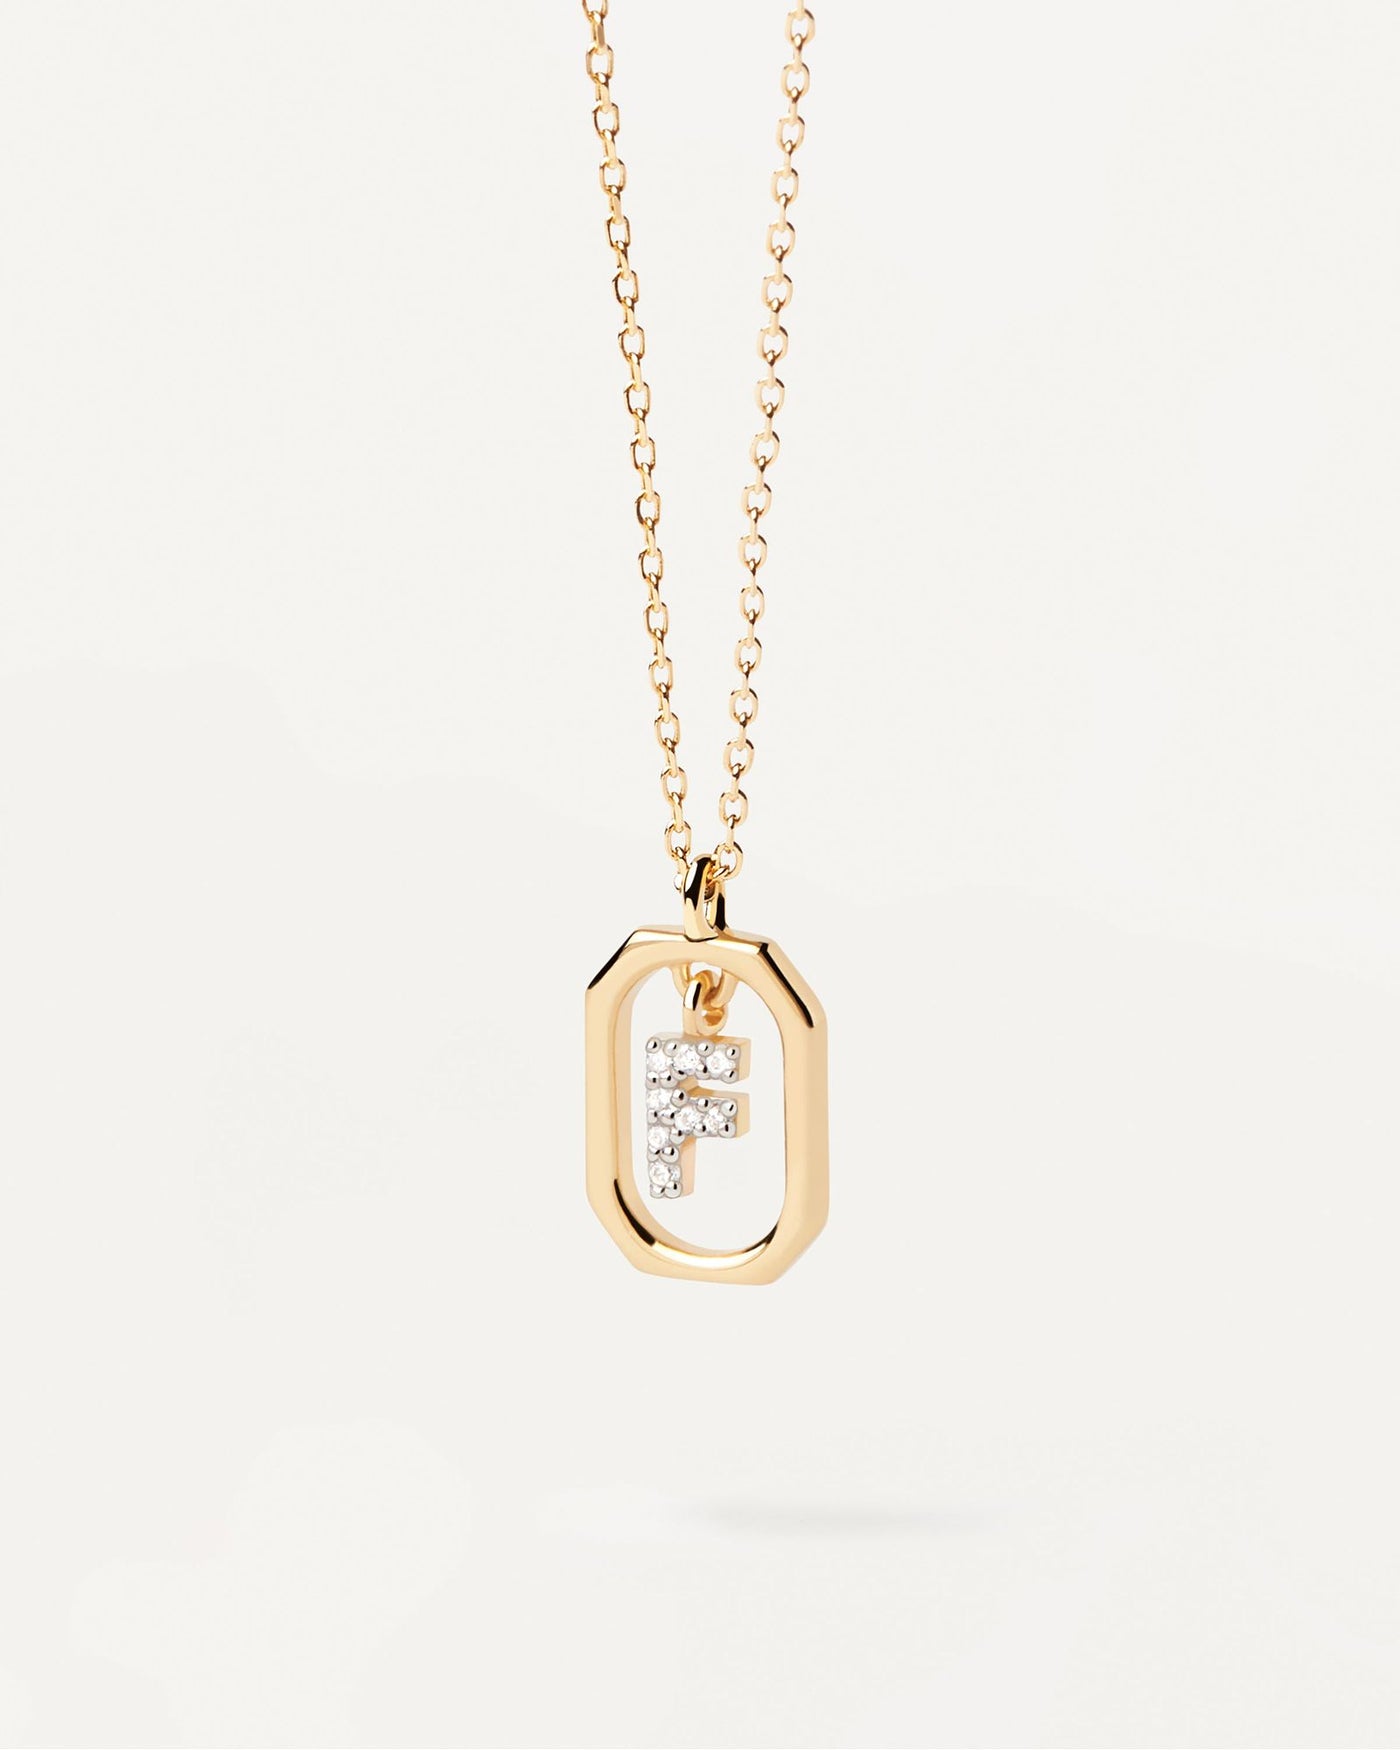 2024 Selection | Mini Letter F Necklace. Small initial F necklace in zirconia inside gold-plated silver octagonal pendant. Get the latest arrival from PDPAOLA. Place your order safely and get this Best Seller. Free Shipping.